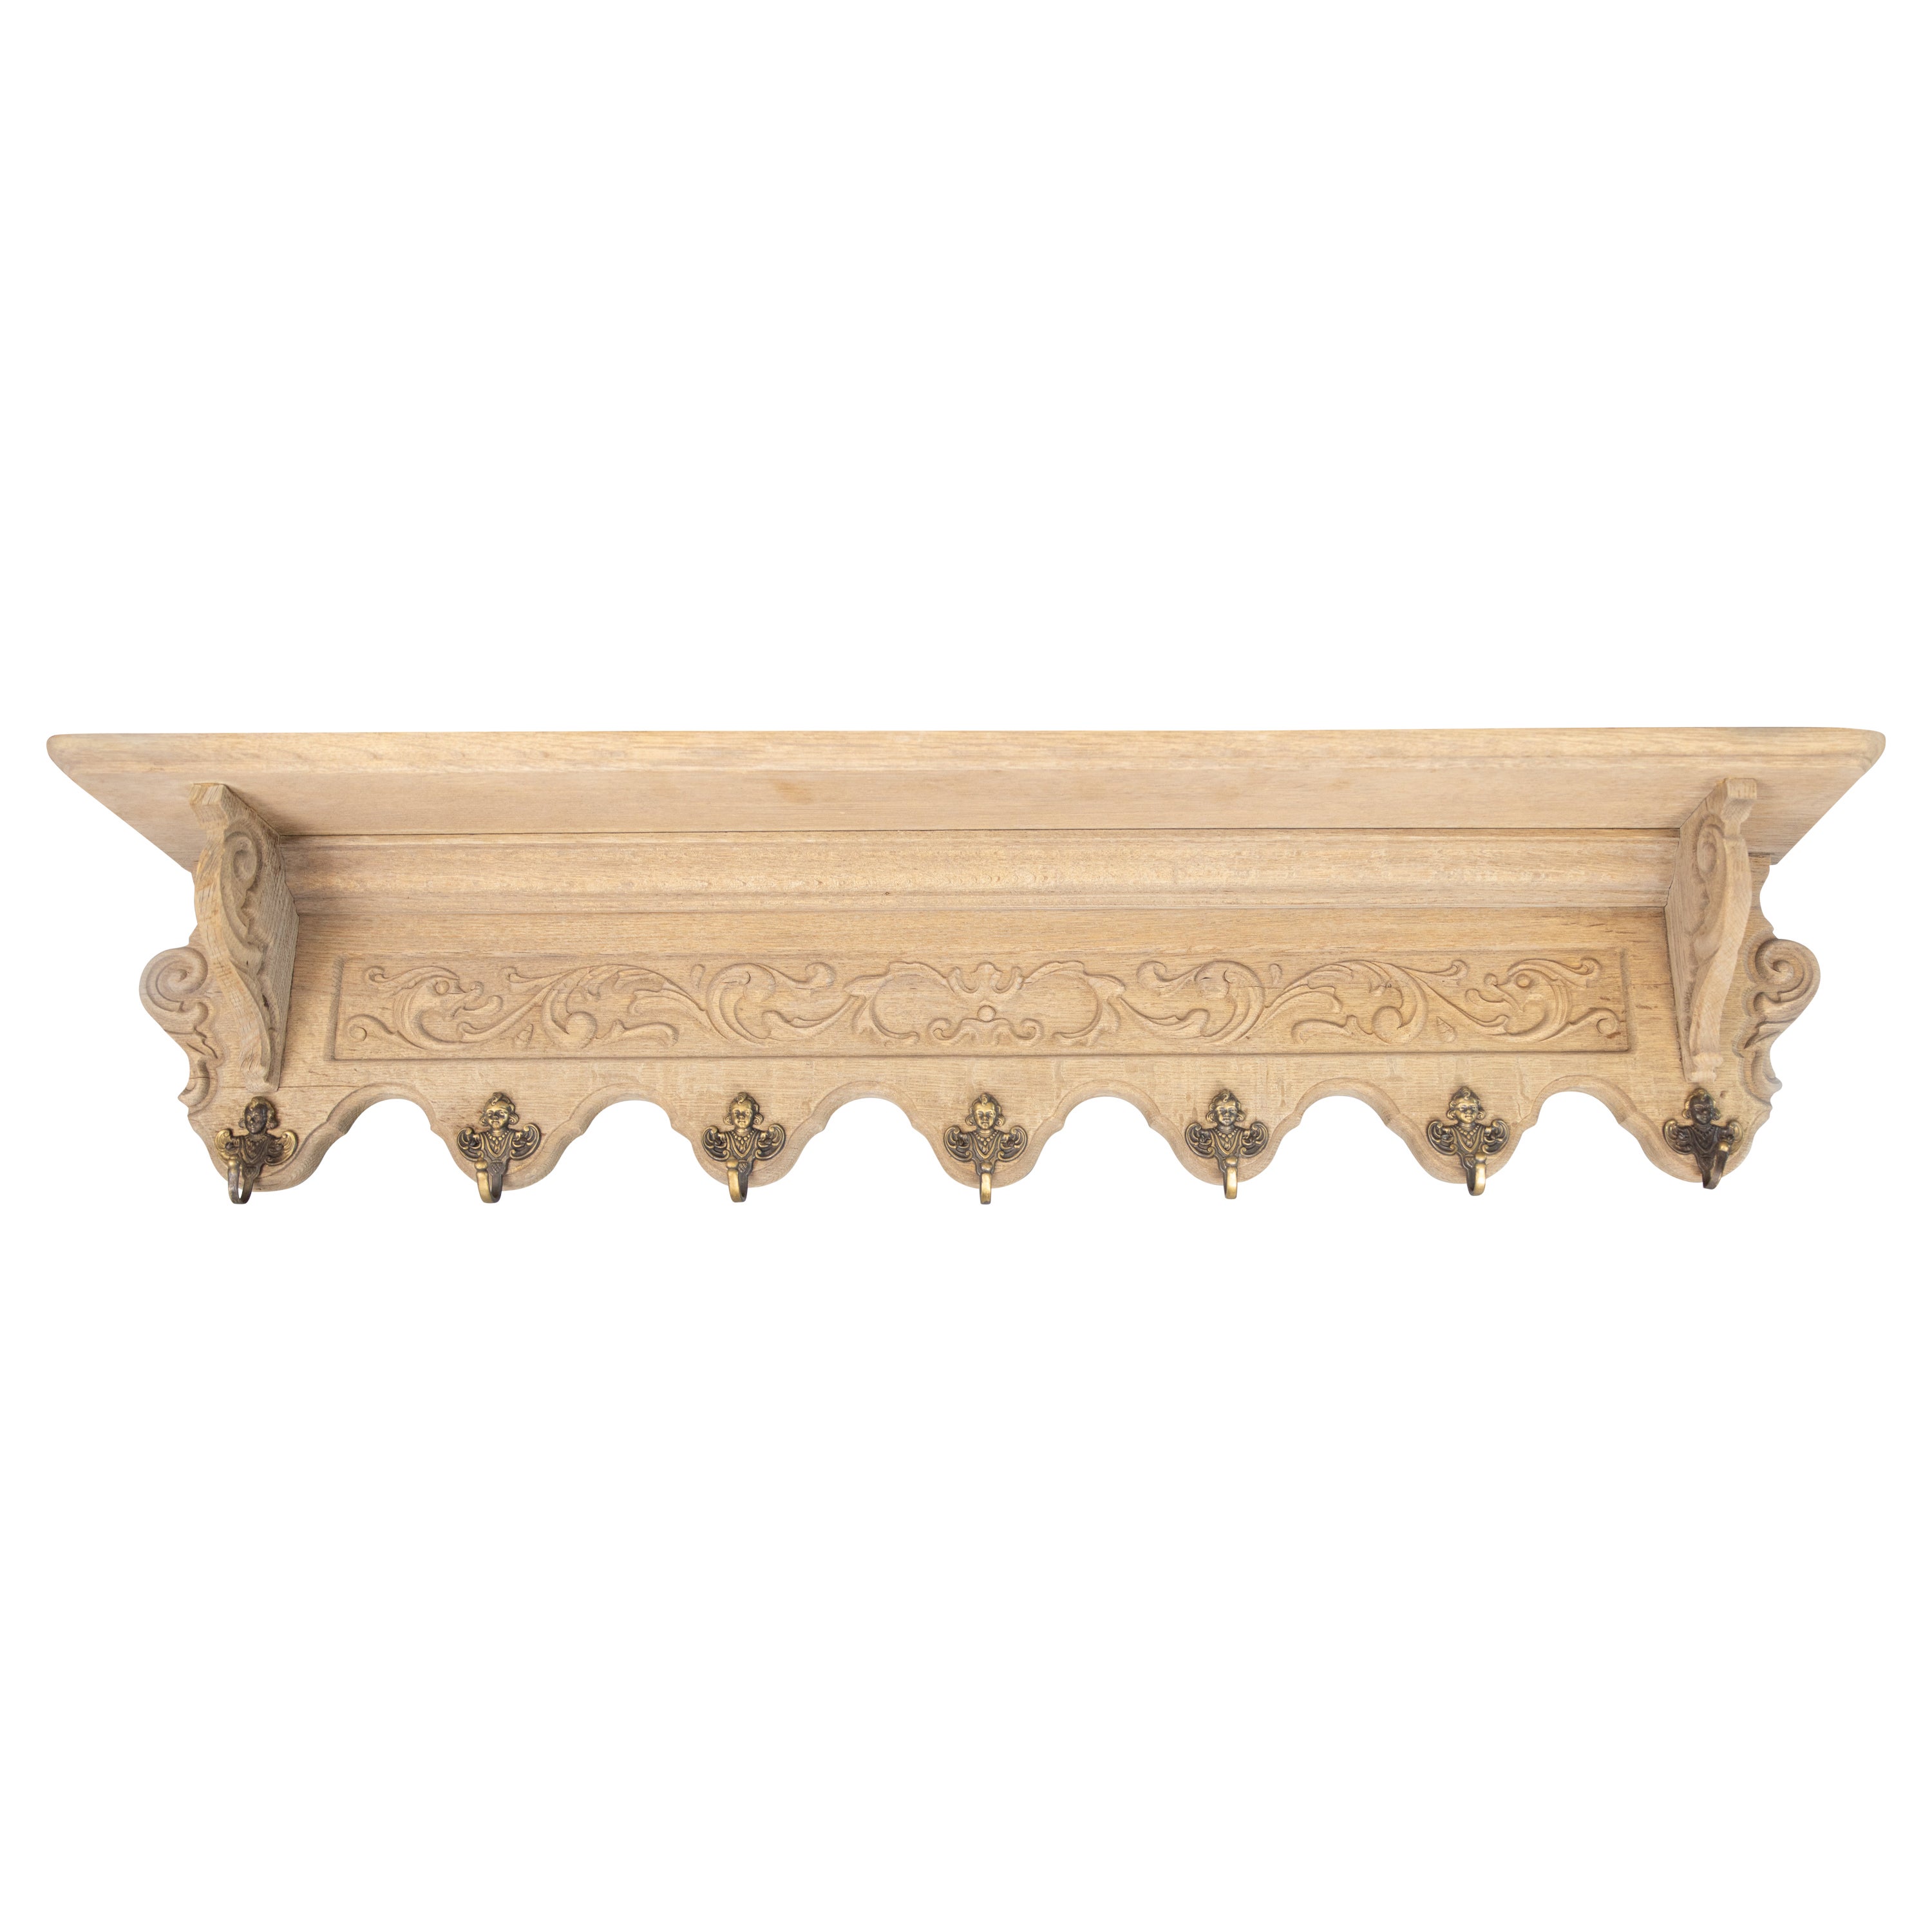 19th-Century French Bleached Oak Carved Coat Rack